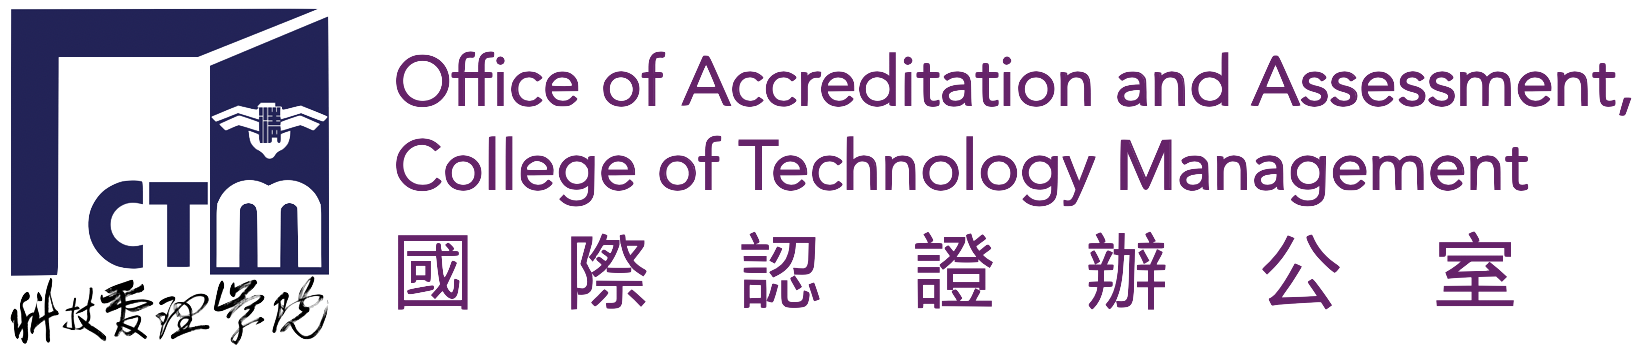 Office of Accreditaion and Assessment